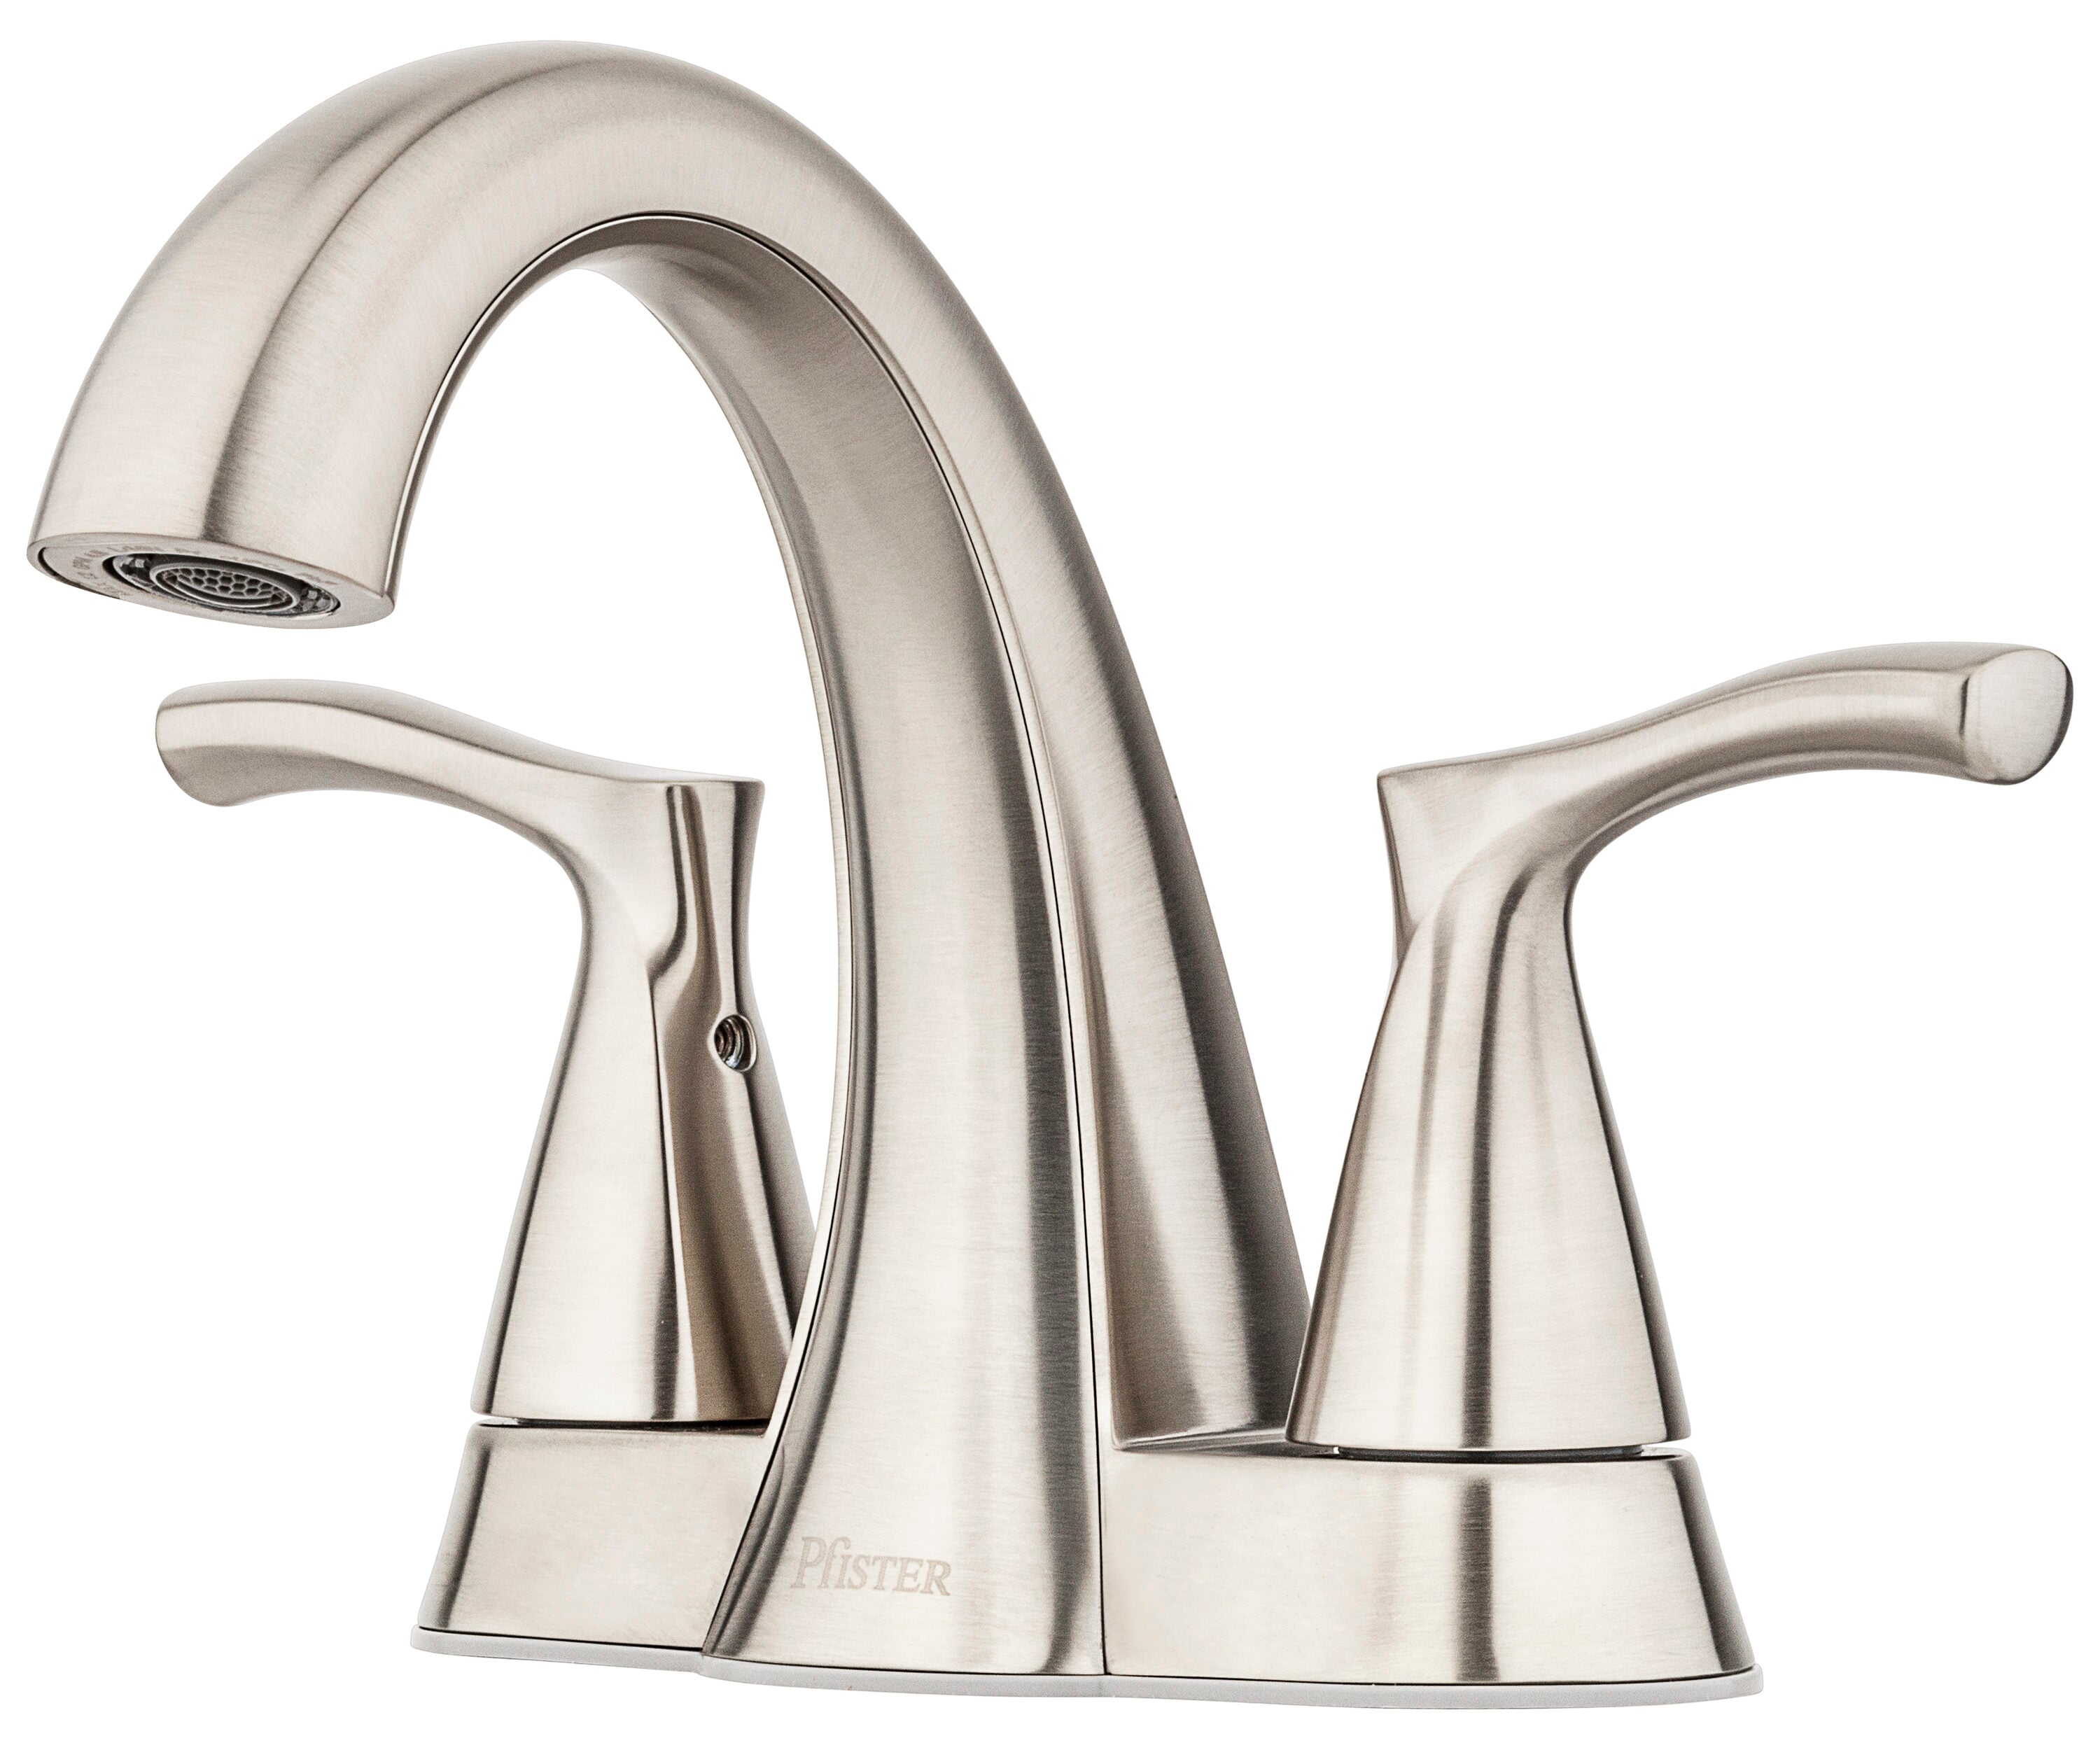 Pfister Masey Brushed Nickel 4-in centerset 2-handle WaterSense Bathroom  Sink Faucet with Drain and Deck Plate (6.031-in)